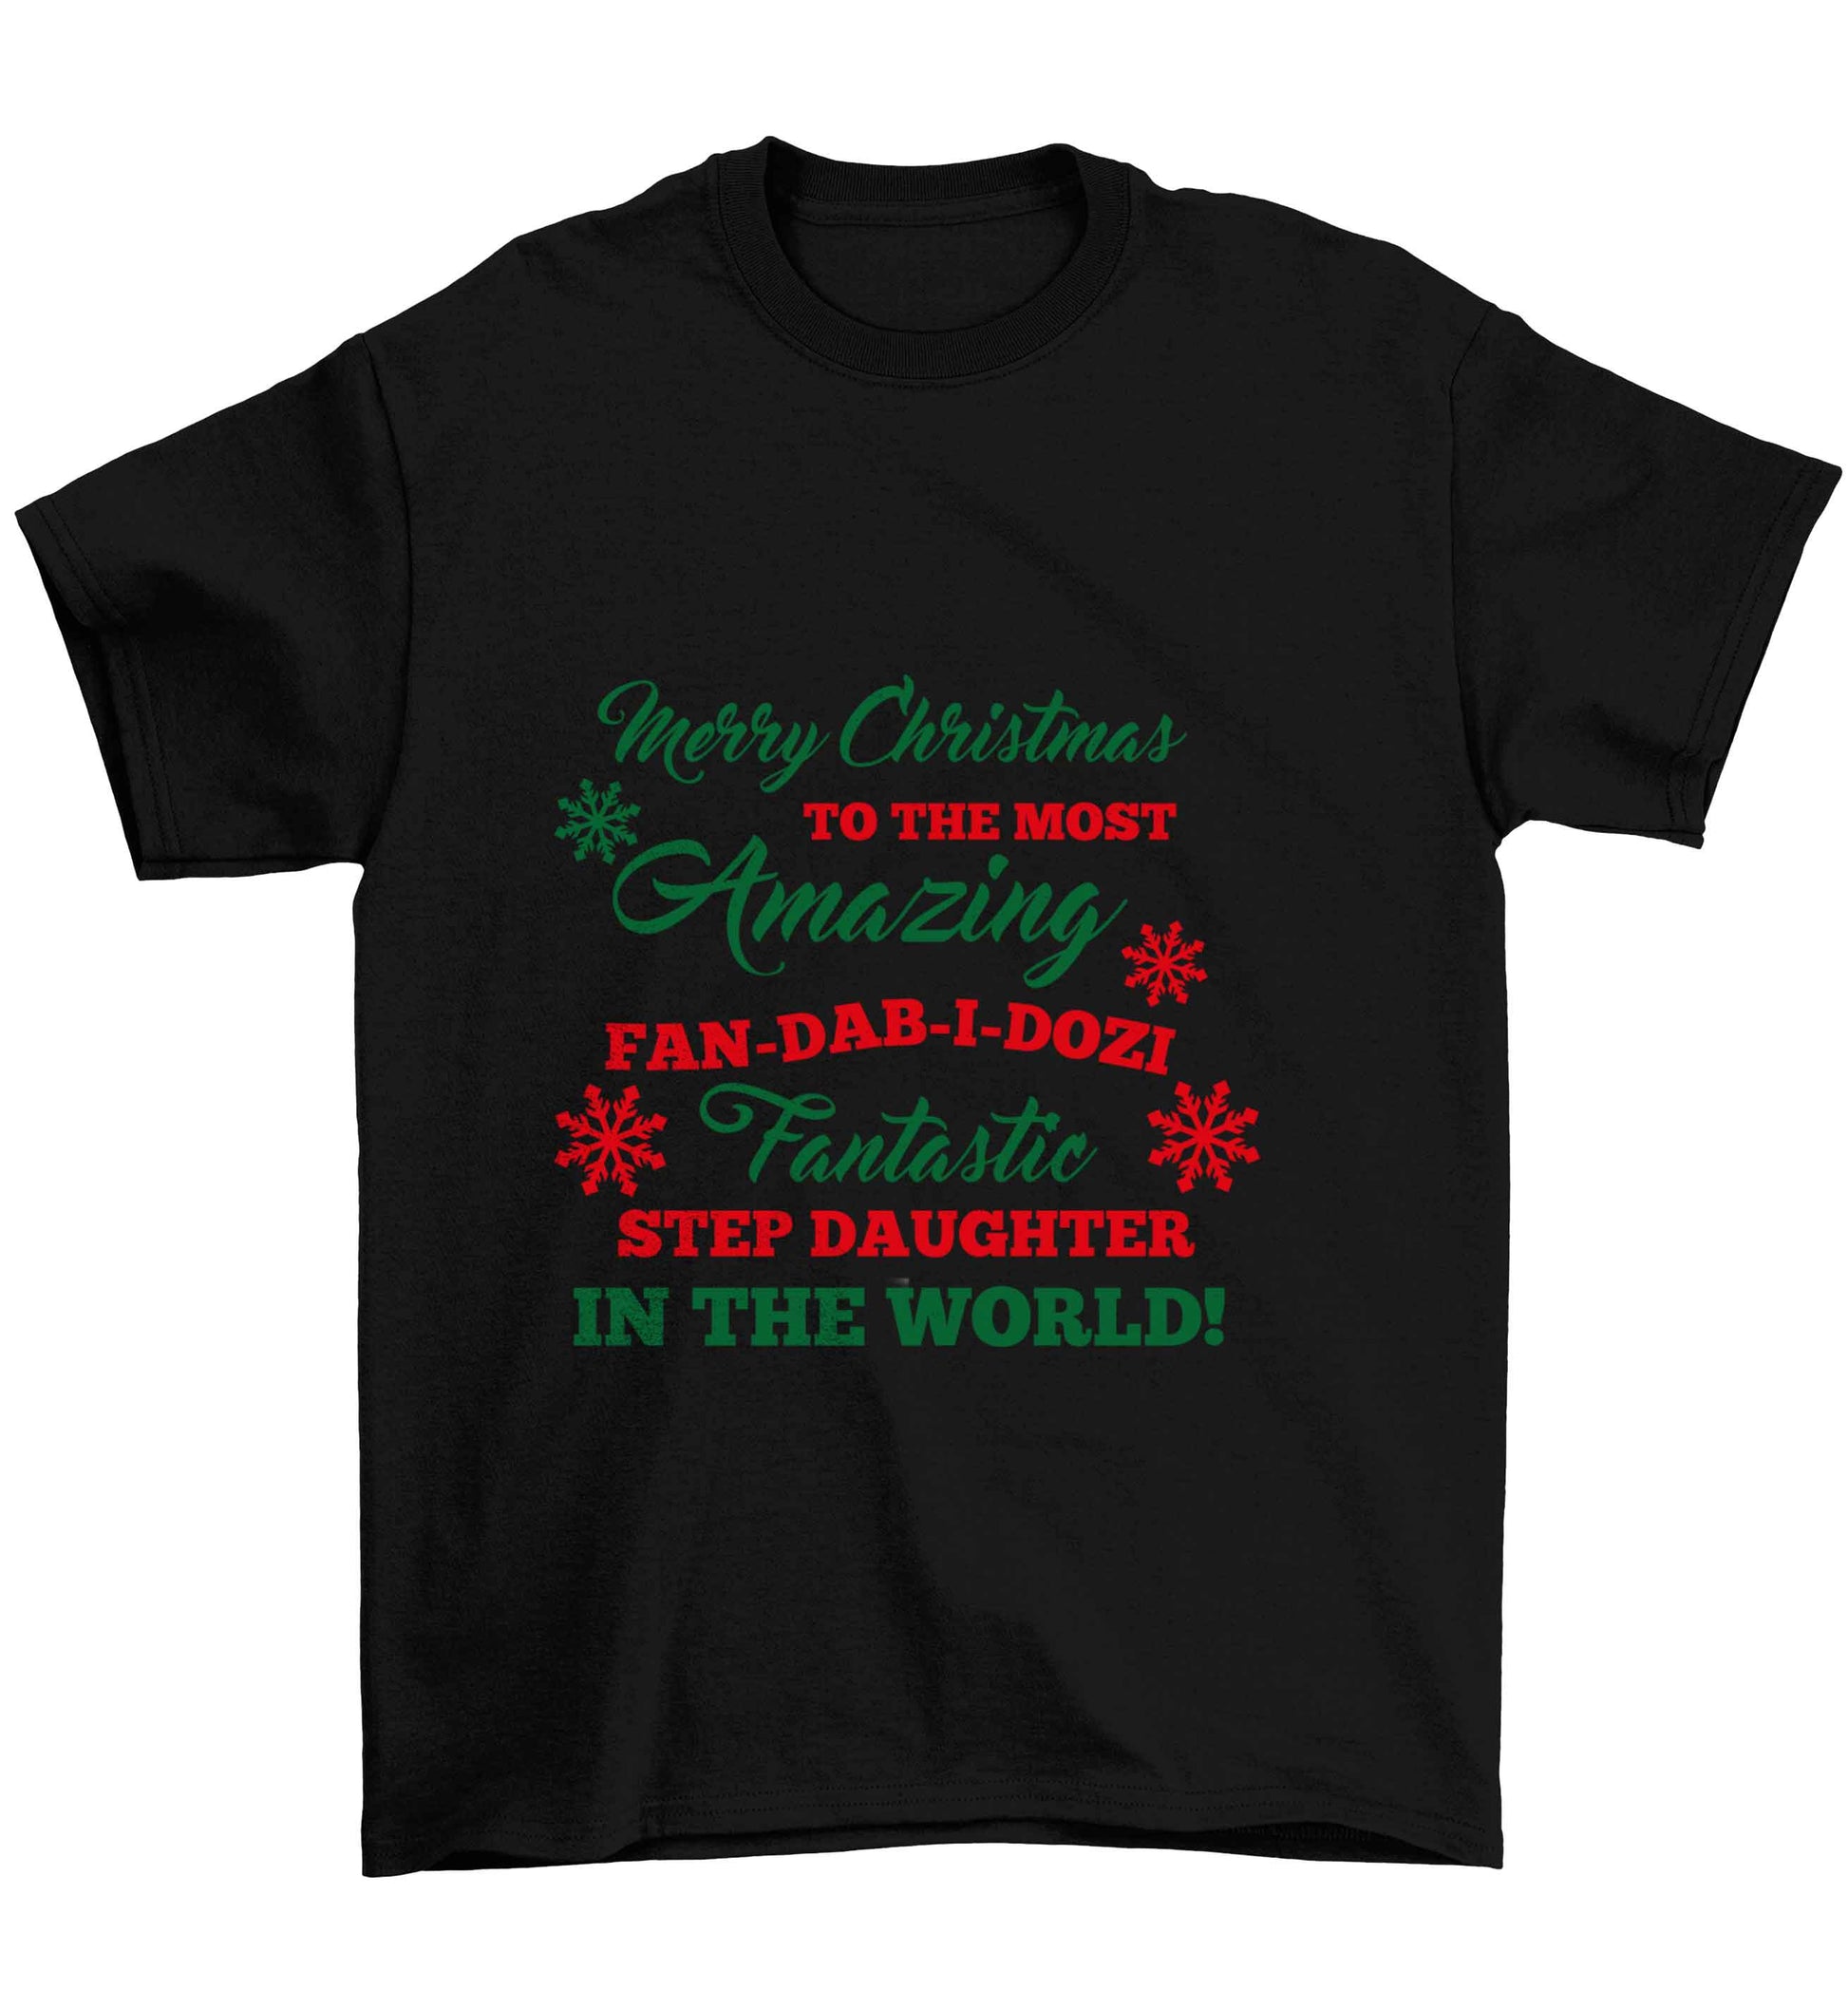 Merry Christmas to the most amazing fan-dab-i-dozi fantasic Step Daughter in the world Children's black Tshirt 12-13 Years